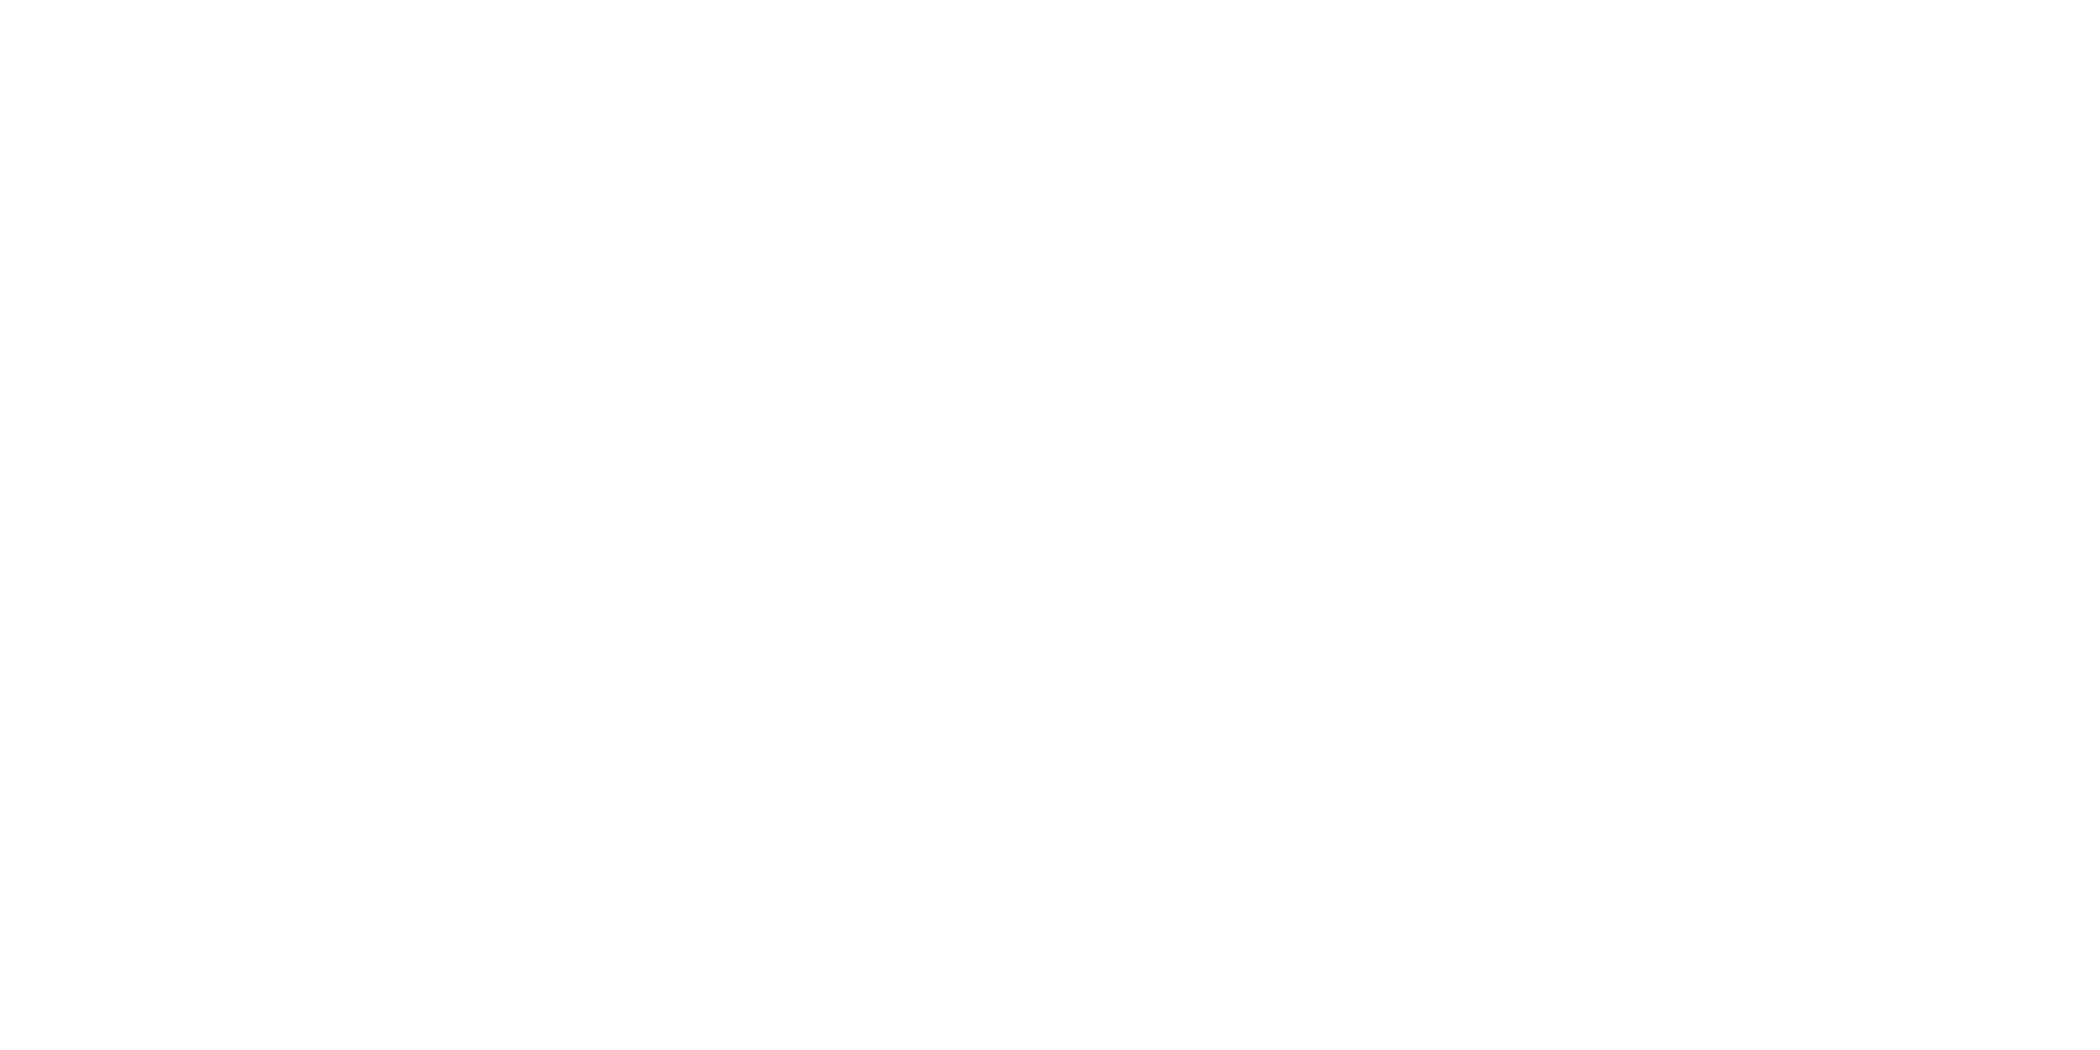 Capitol Kitchens and Baths